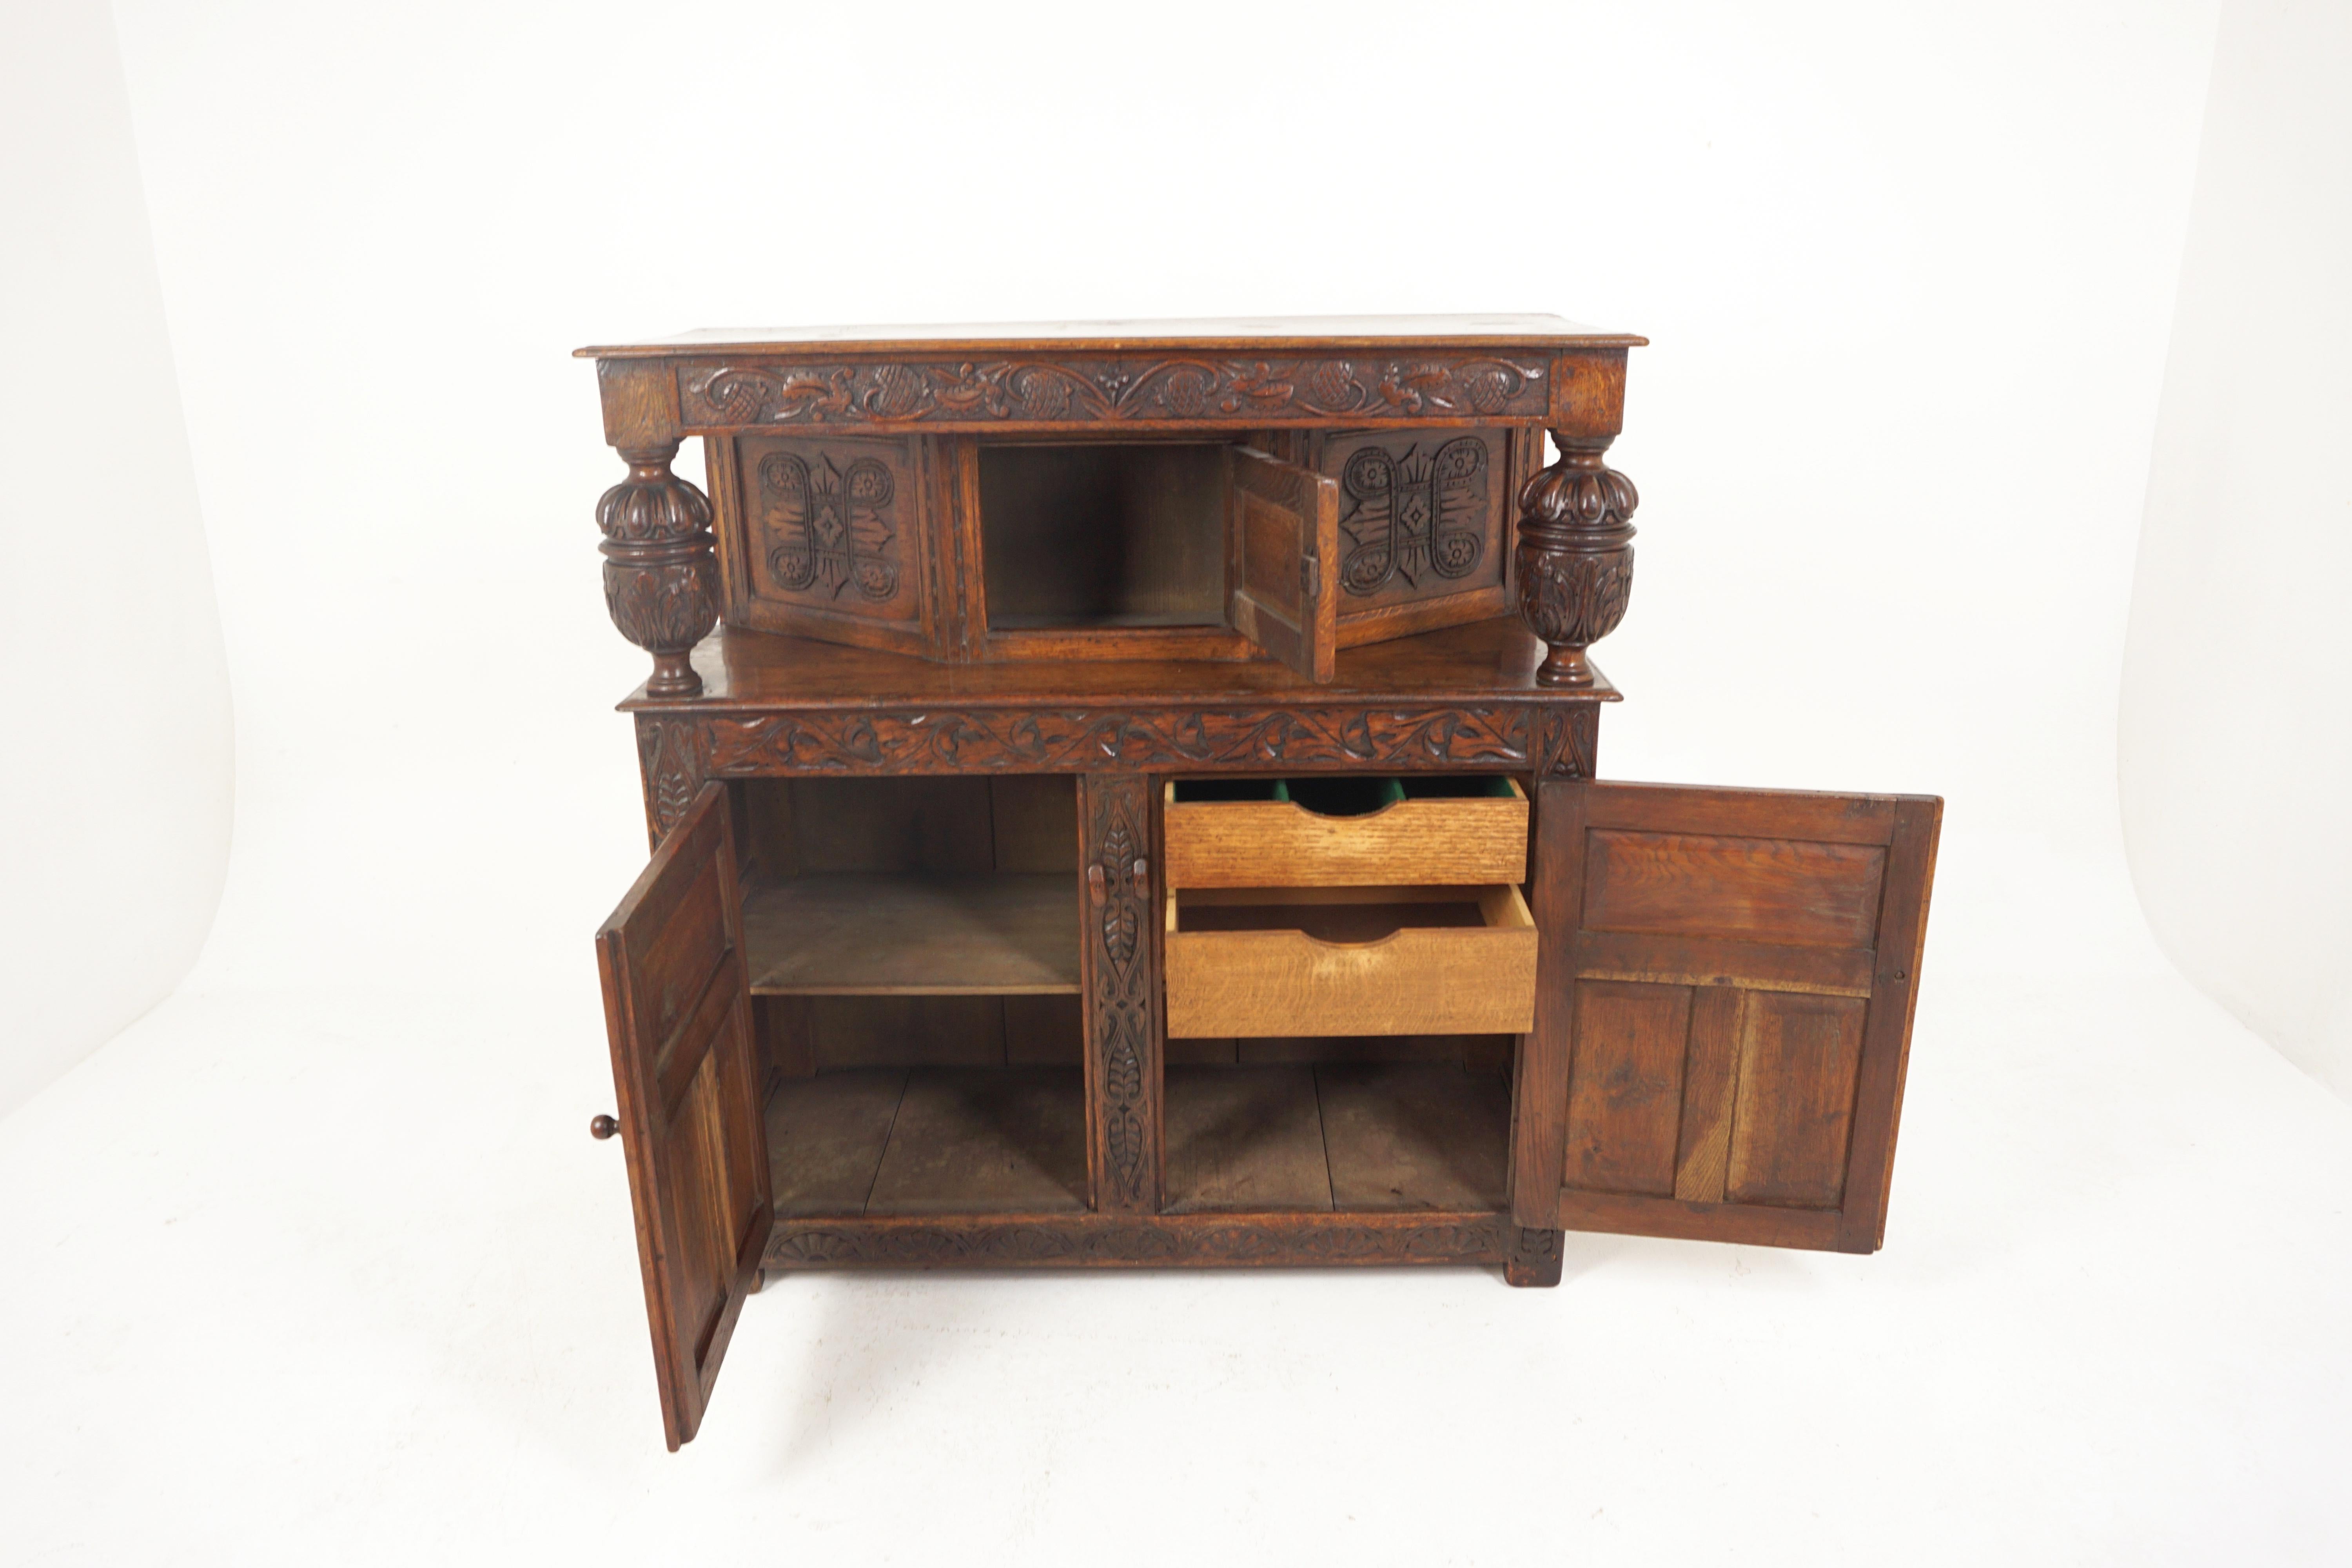 Antique Oak Court cupboard, sideboard, buffet, Scotland 1910, B2667

Scotland 1910
Solid oak
Original finish
Solid oak top with moulded edge
Having carved detail under
The shaped top has a single carved panel door
Door opens to reveal